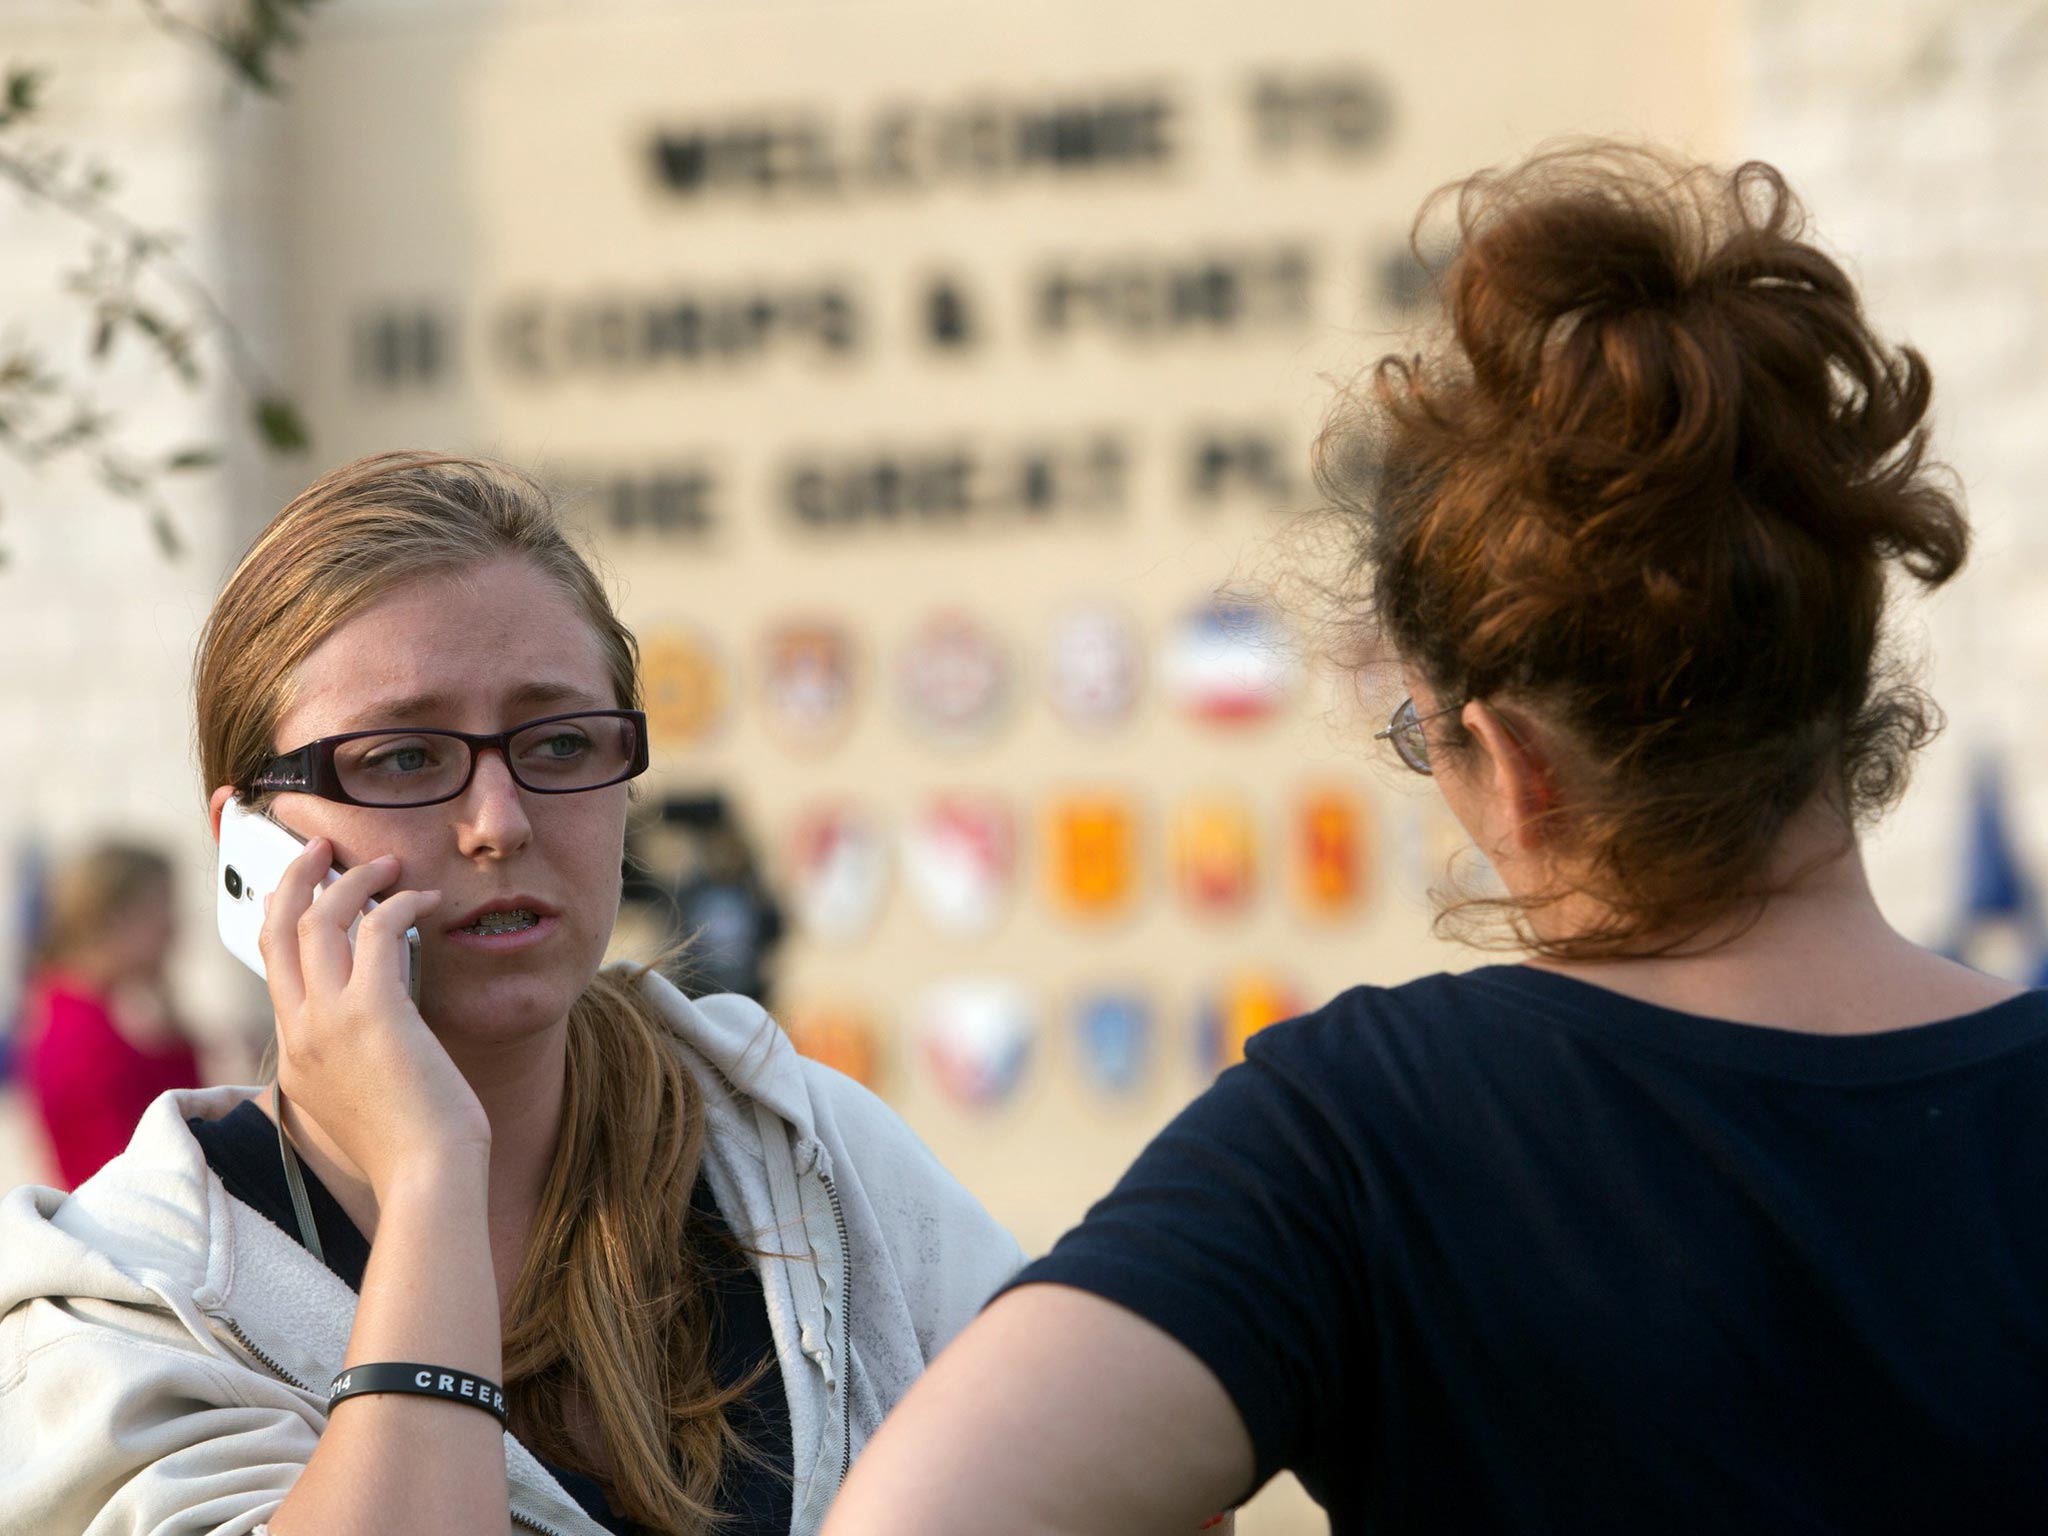 Krystina Cassidy and Dianna Simpson try to contact their
husbands, who were inside the base during the shooting